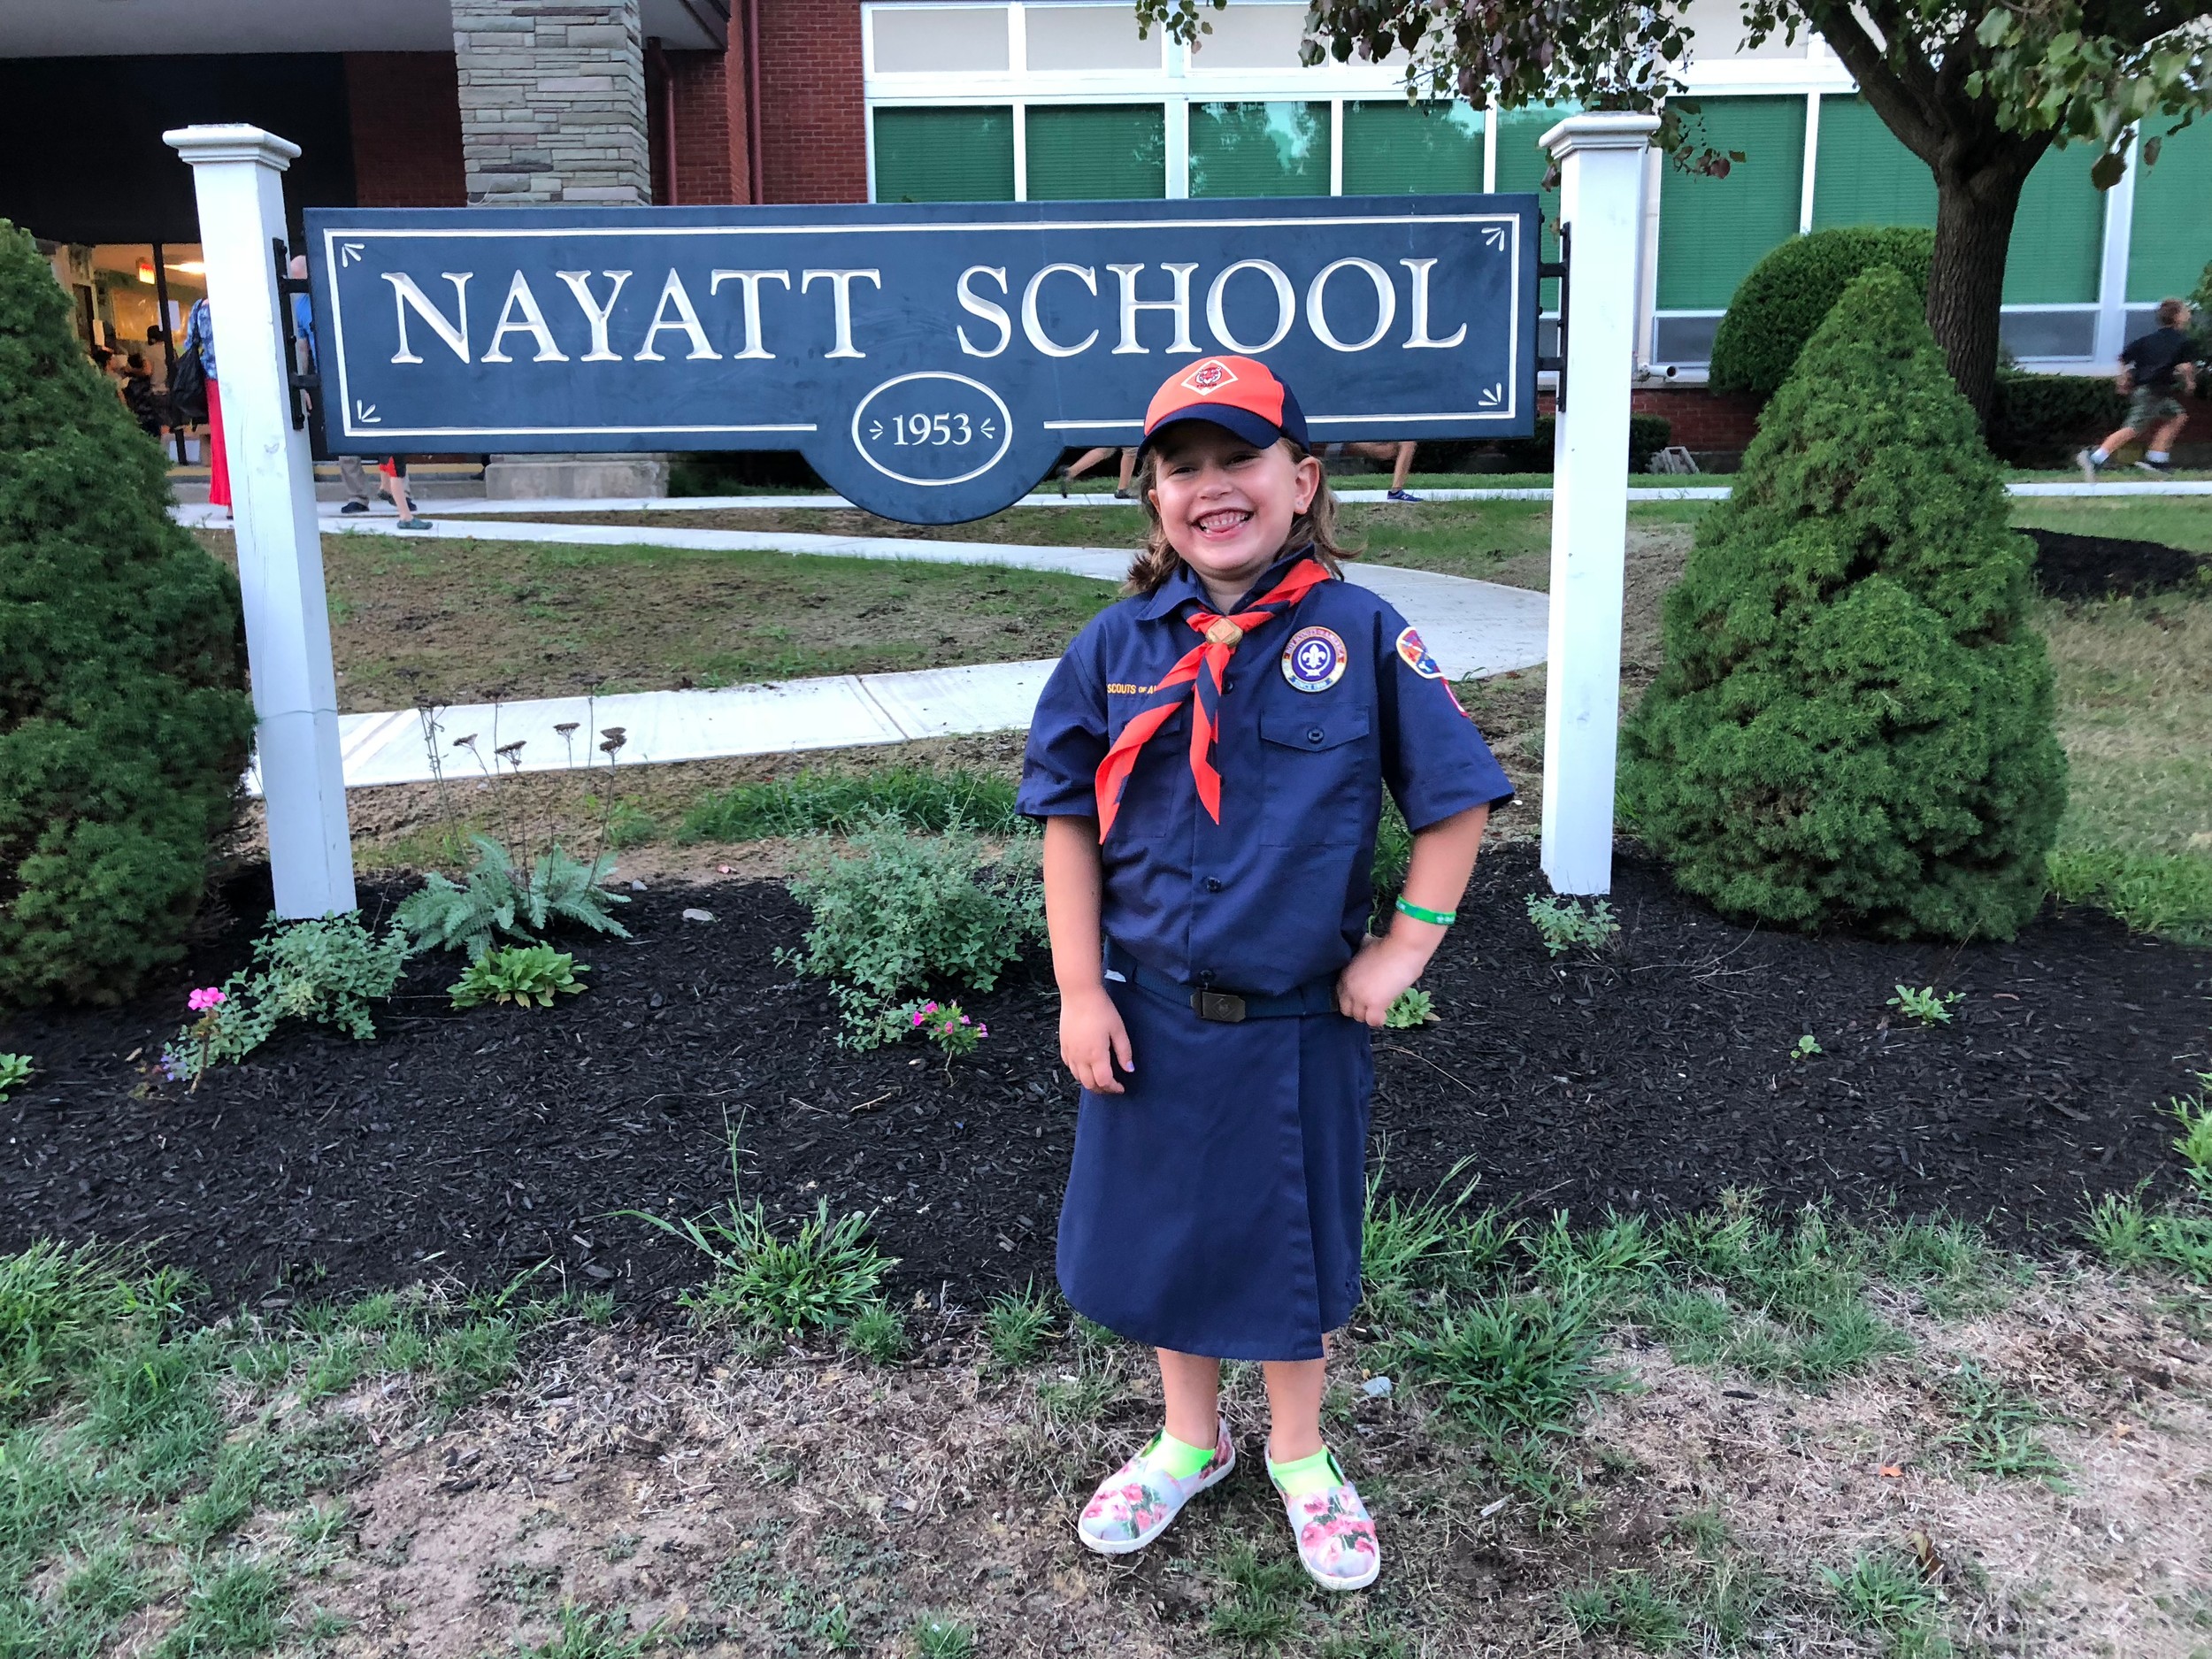 Liliana Colacchio, one of the newest members of Cub Scout Pack 1 Nayatt, stands in front of Nayatt School after registering last week. For the first time ever, girls signed up for the local Cub Scout pack.